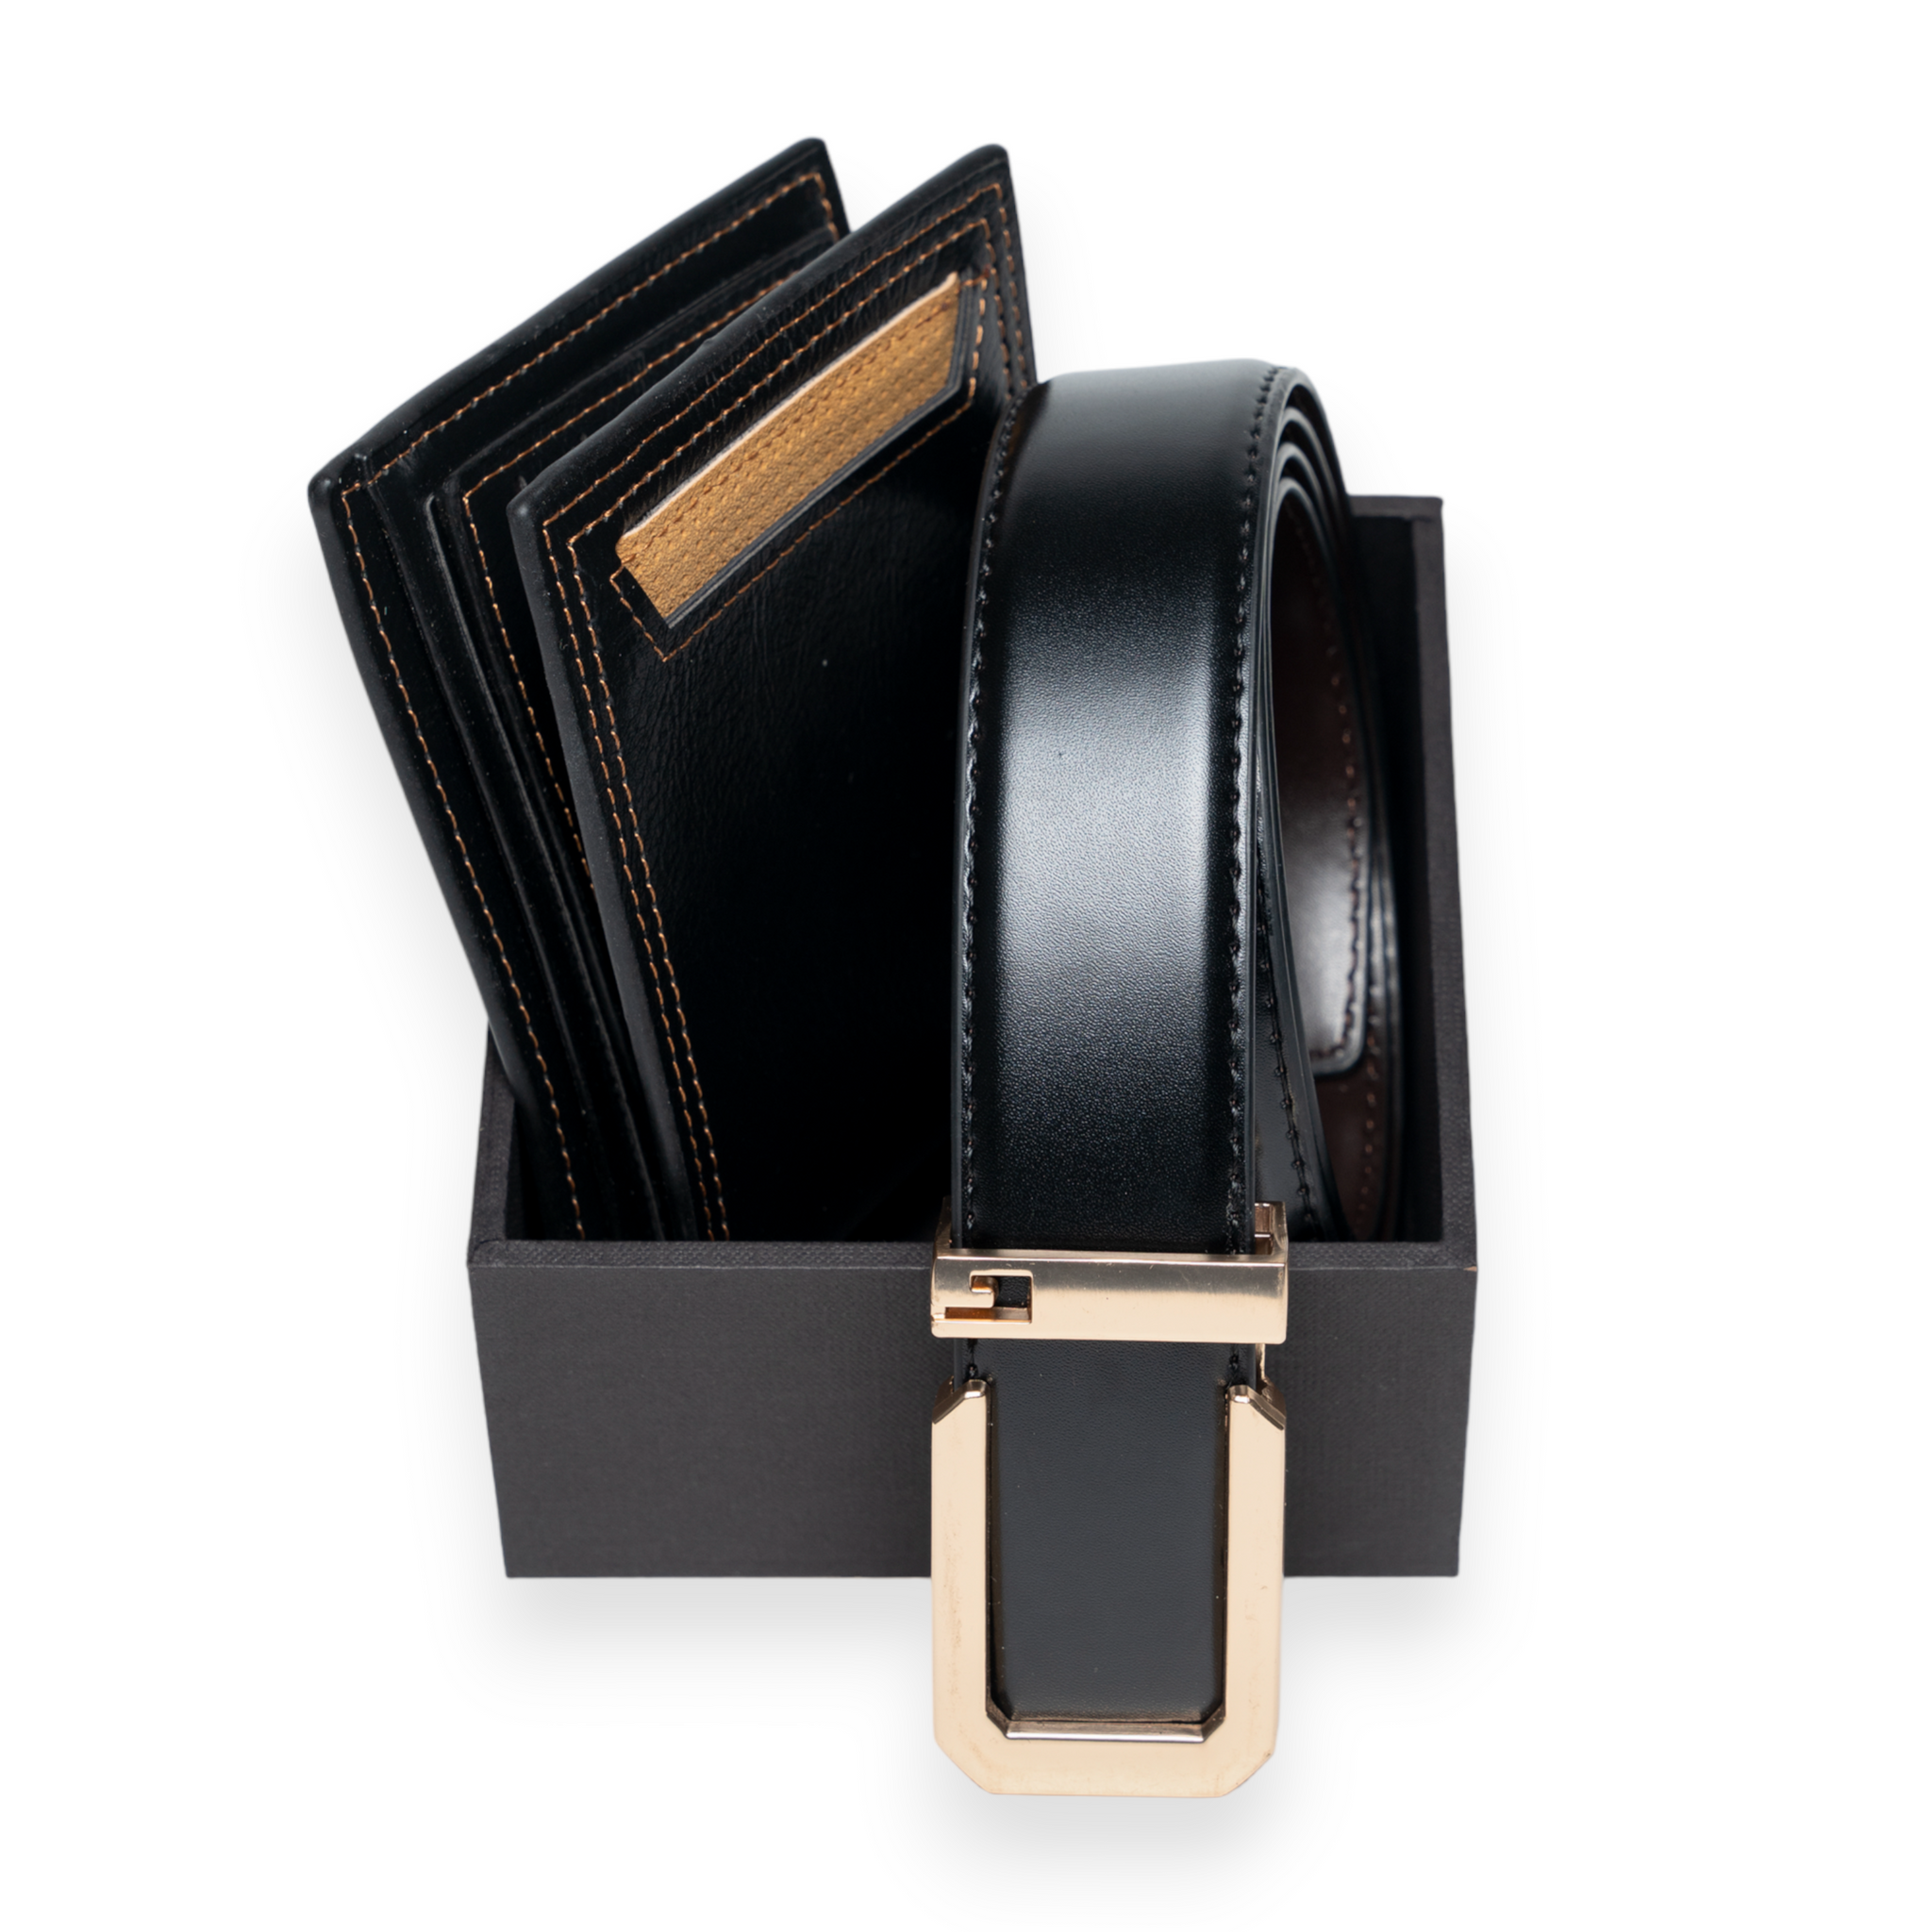 Chokore Special 2-in-1 Gift Set for Him (Black Belt and Wallet)